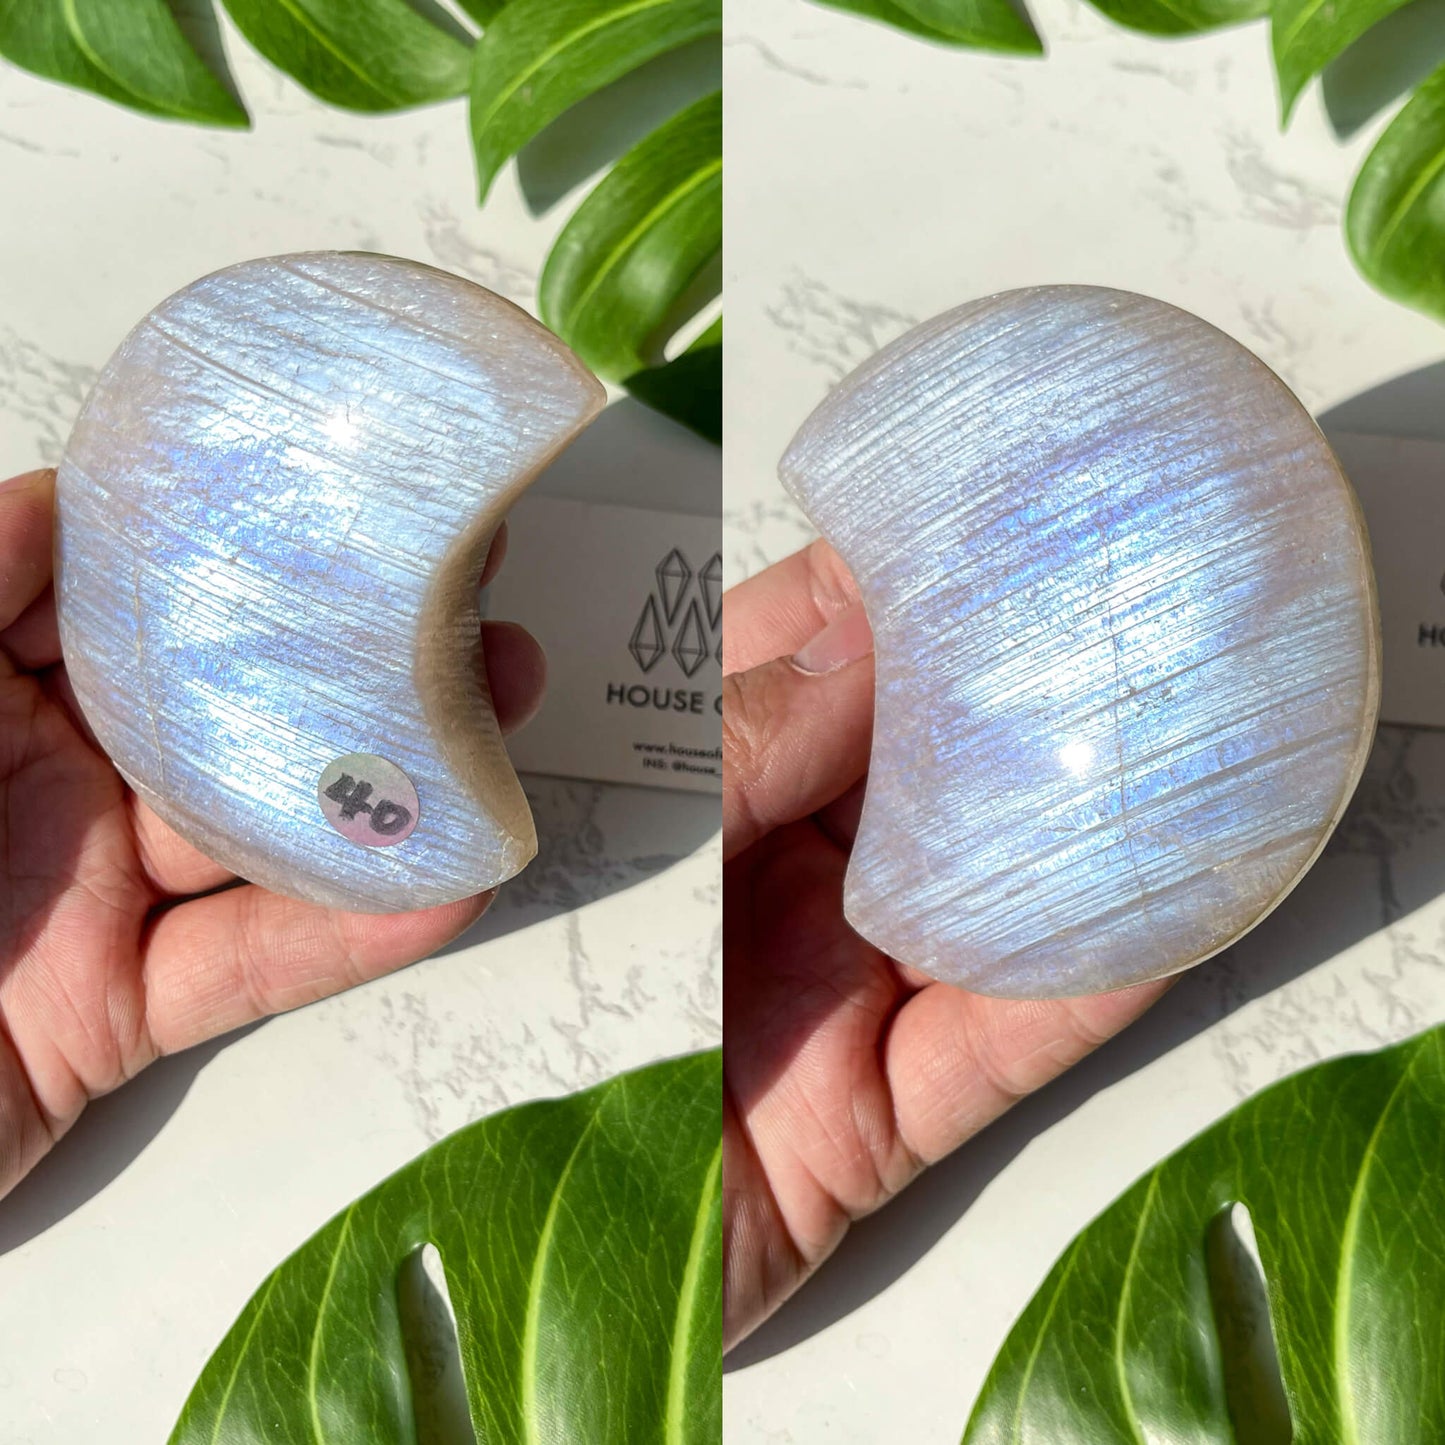 Natural Large Moonstone with Sunstone Carvings/Belomorite Moonstone Moon/Blue Moonstone Hand Carved Moon/Flash Moonstone with Sunstone